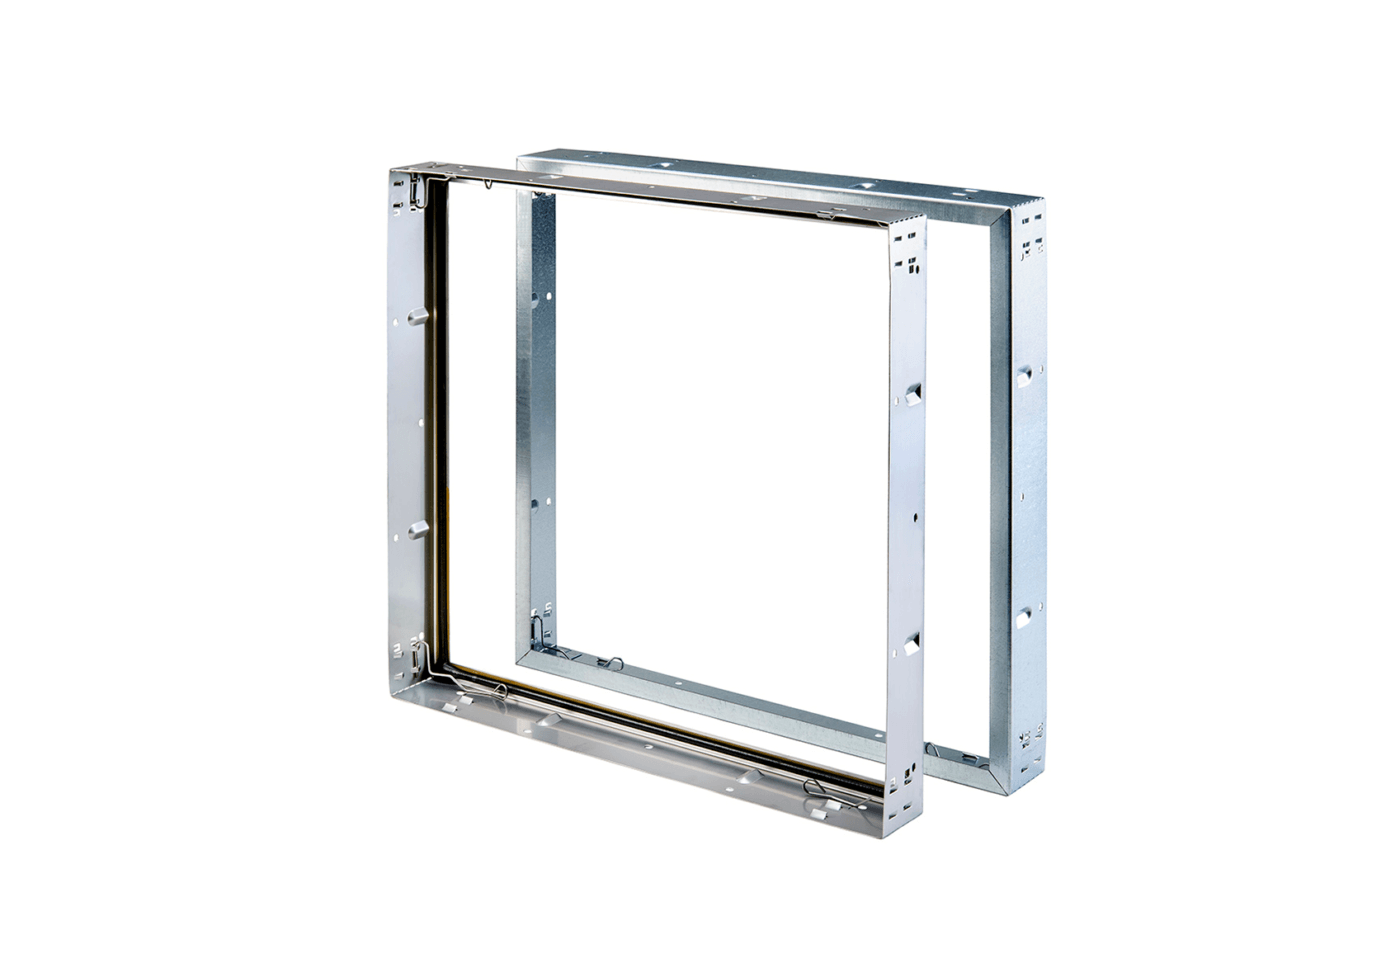 Mounting frame and equipment for filter walls